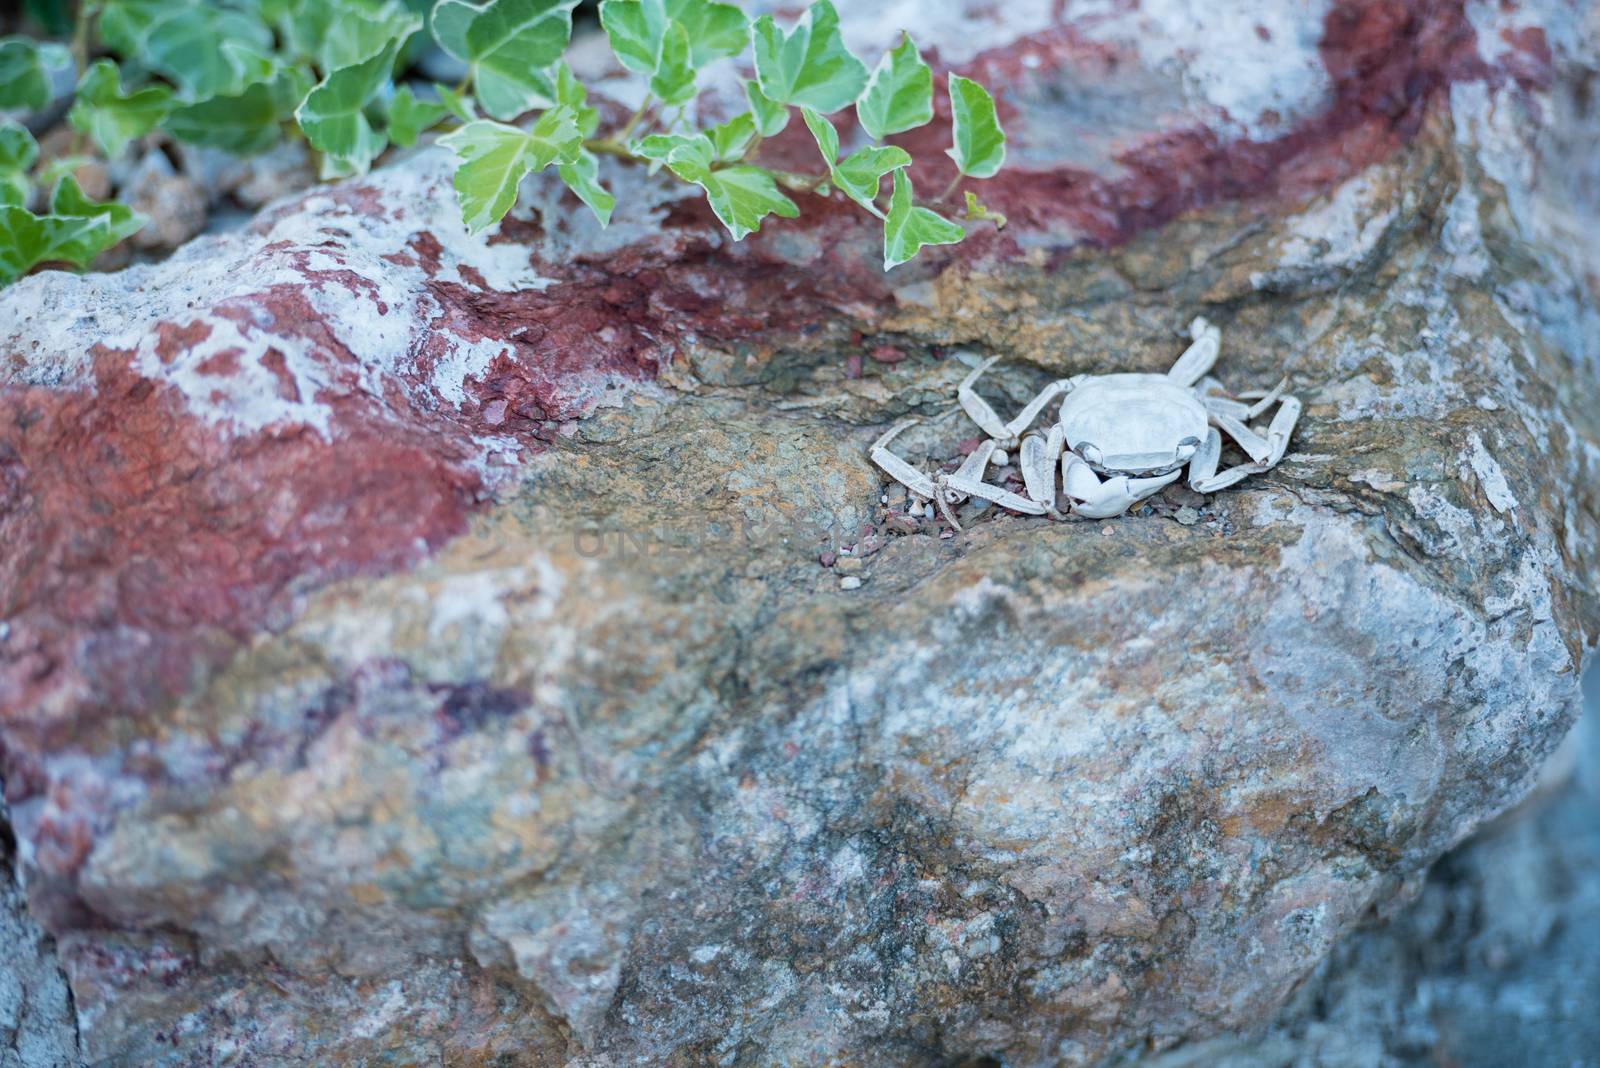 The shell of a crab which has dried and turned white in the sun on a rock with ivy.